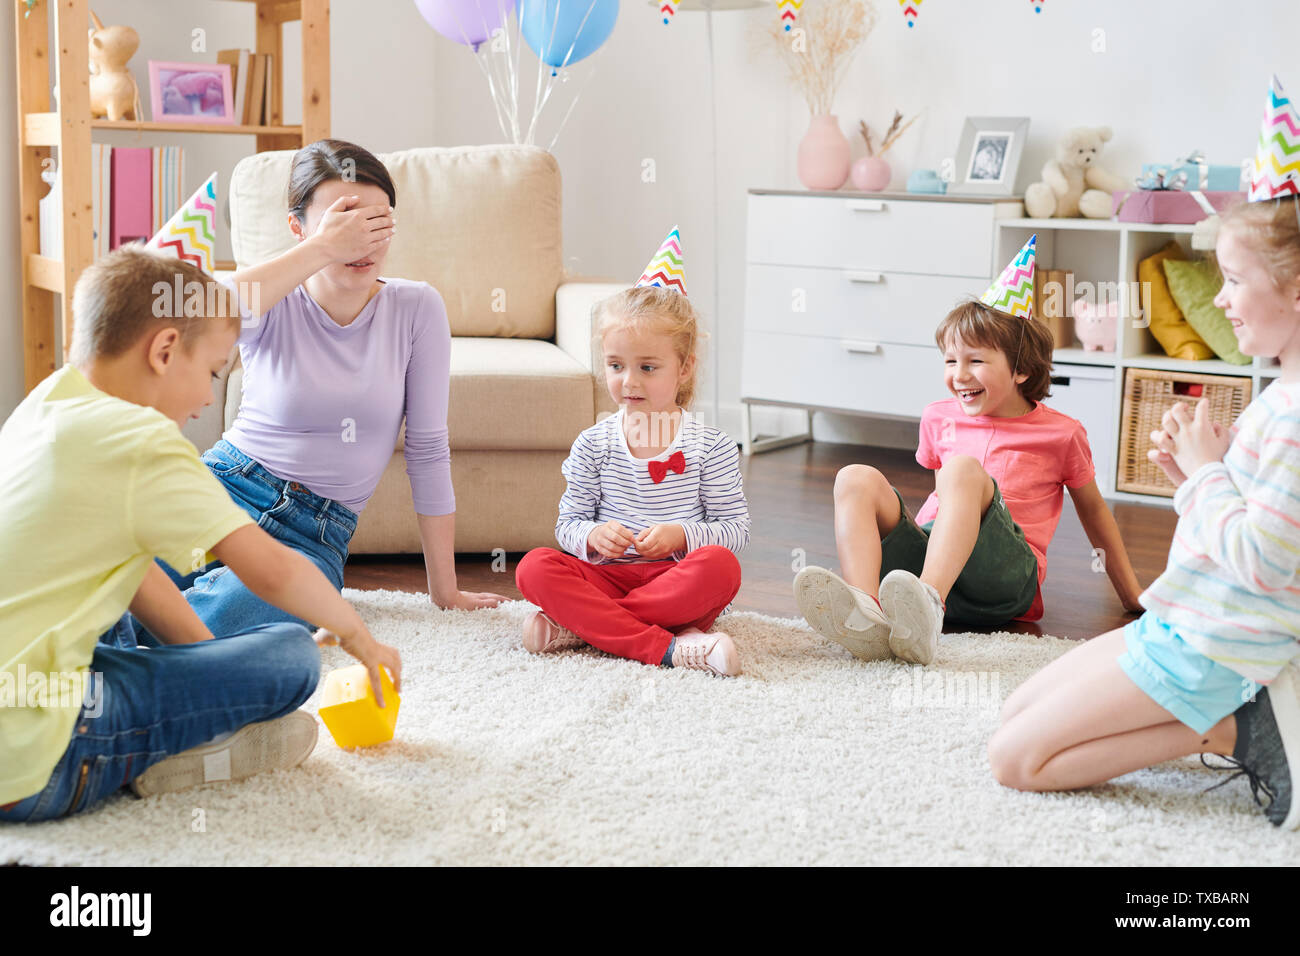 Group of cheerful little kids in birthday caps sitting in circle on rug Stock Photo